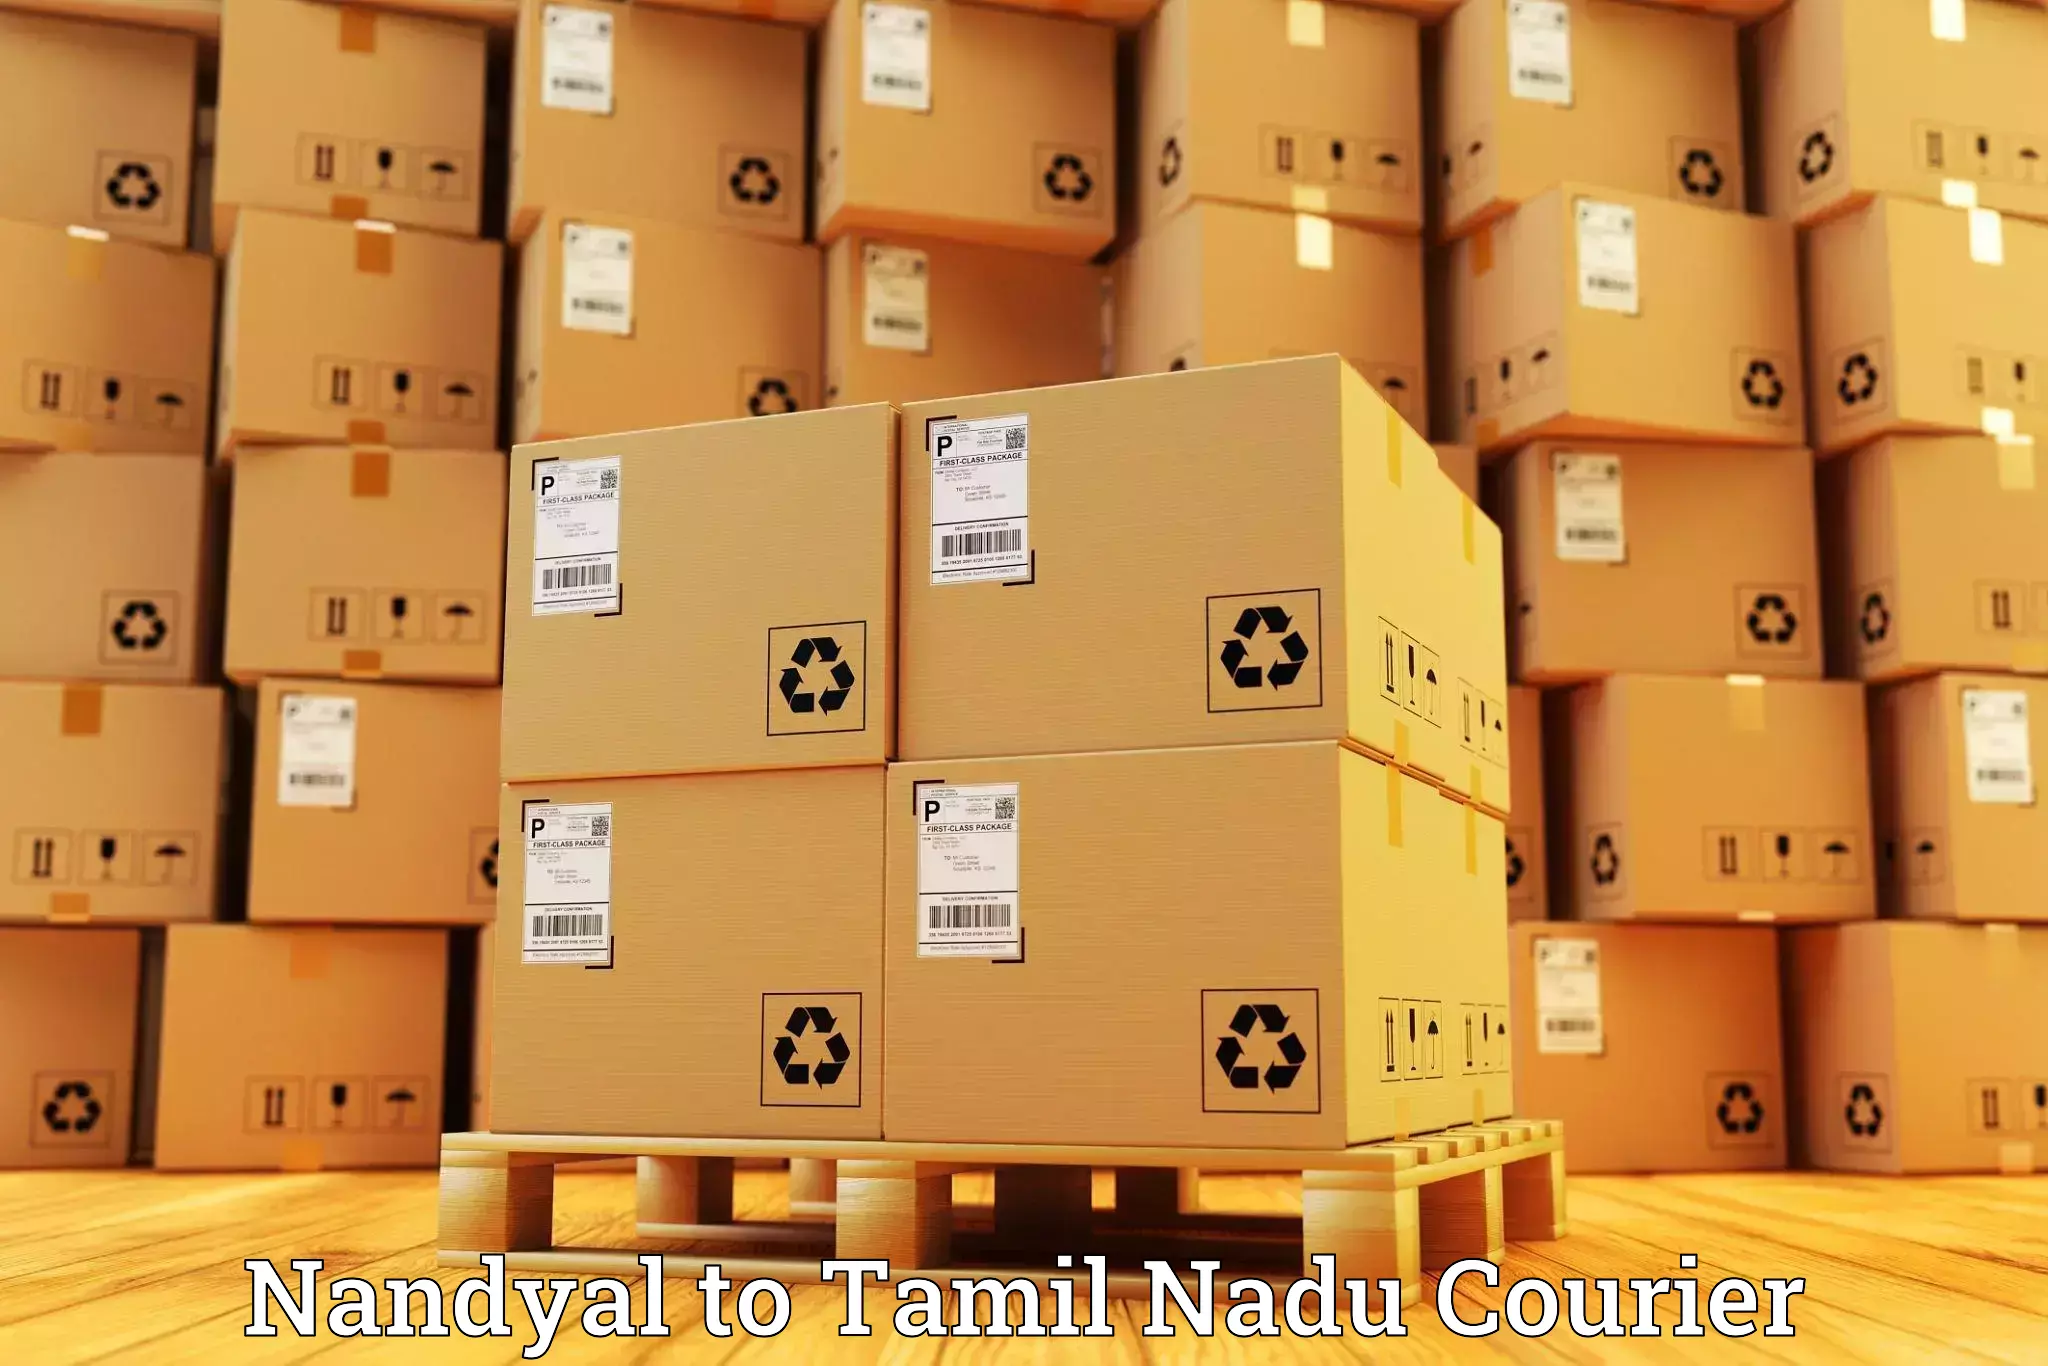 Express delivery capabilities Nandyal to Anthiyur